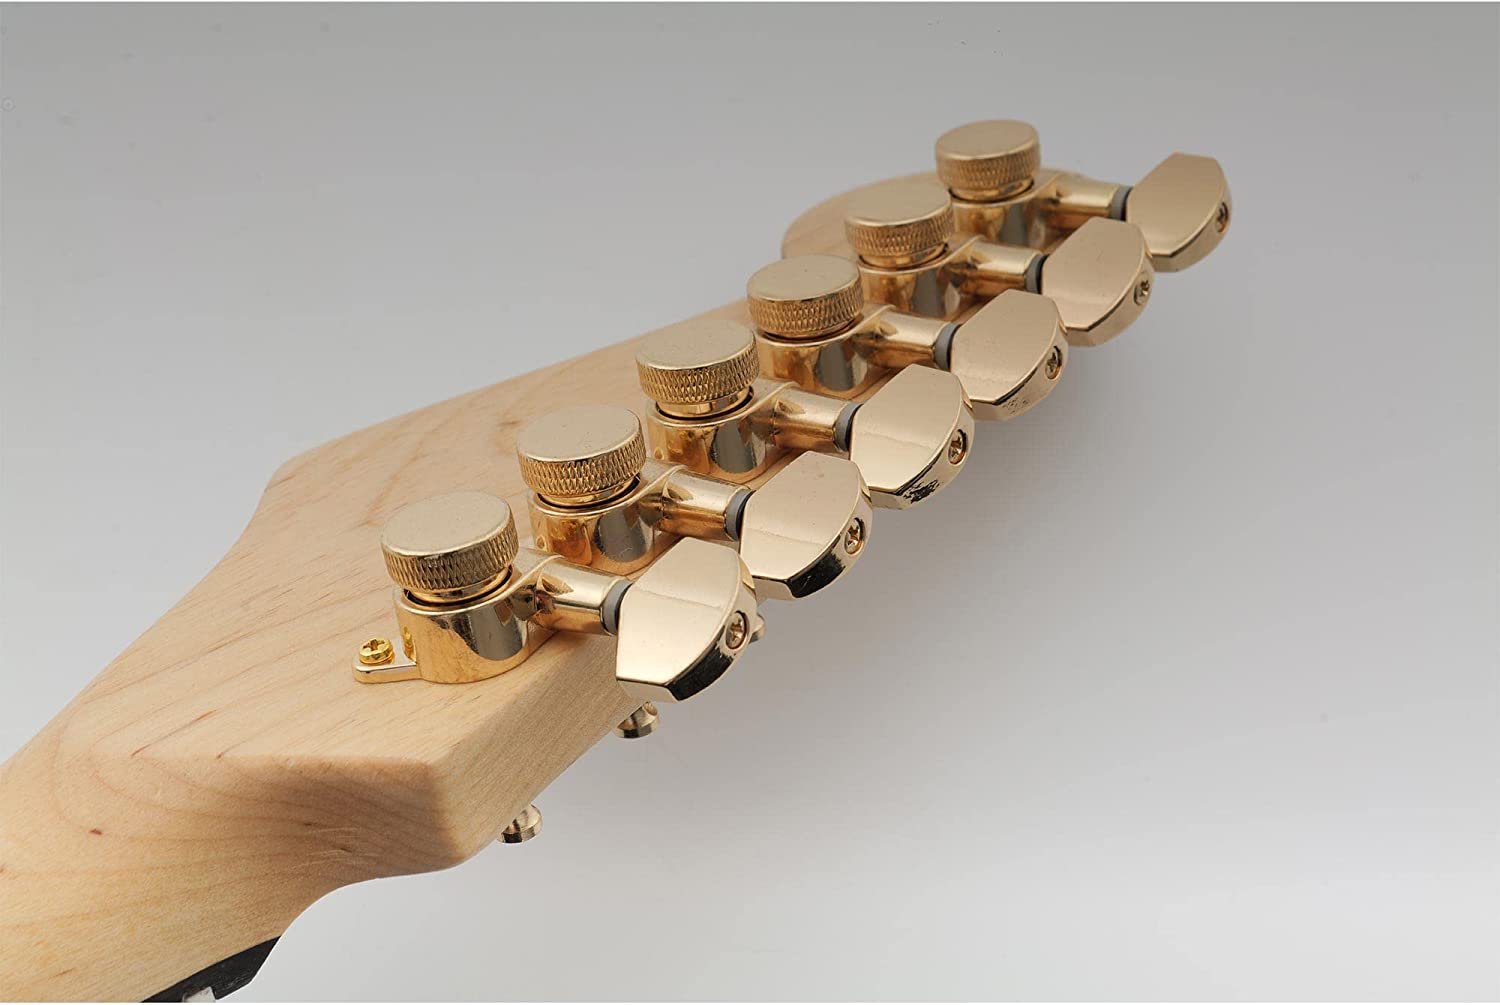 6-in-line Locking Guitar Tuning Pegs, Gold